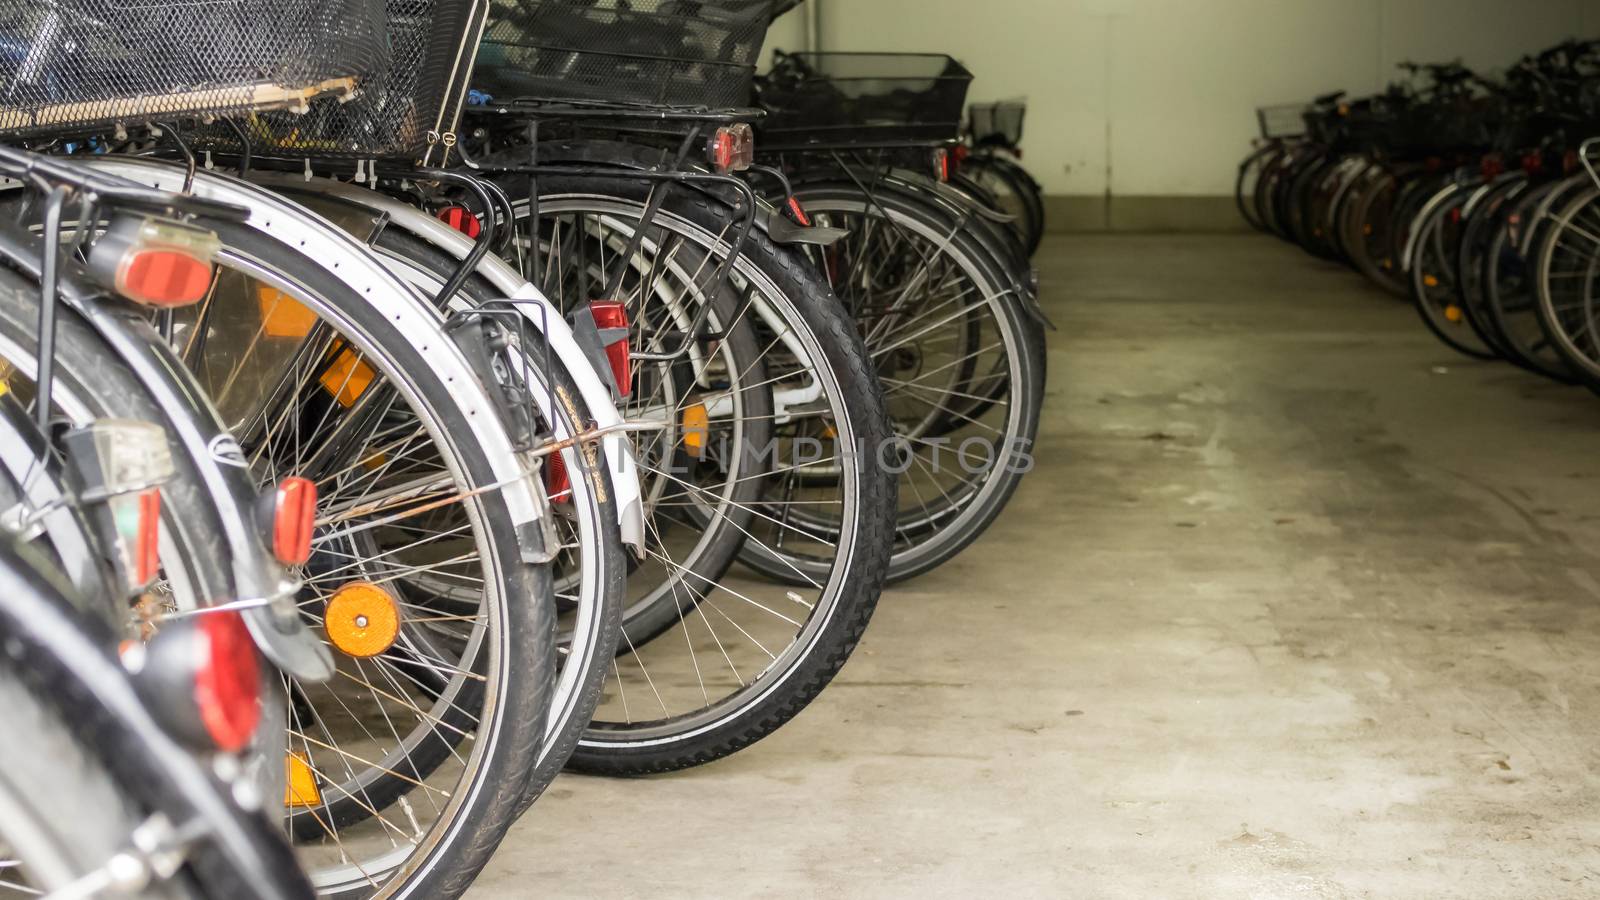 Many parked bicycles in a garage